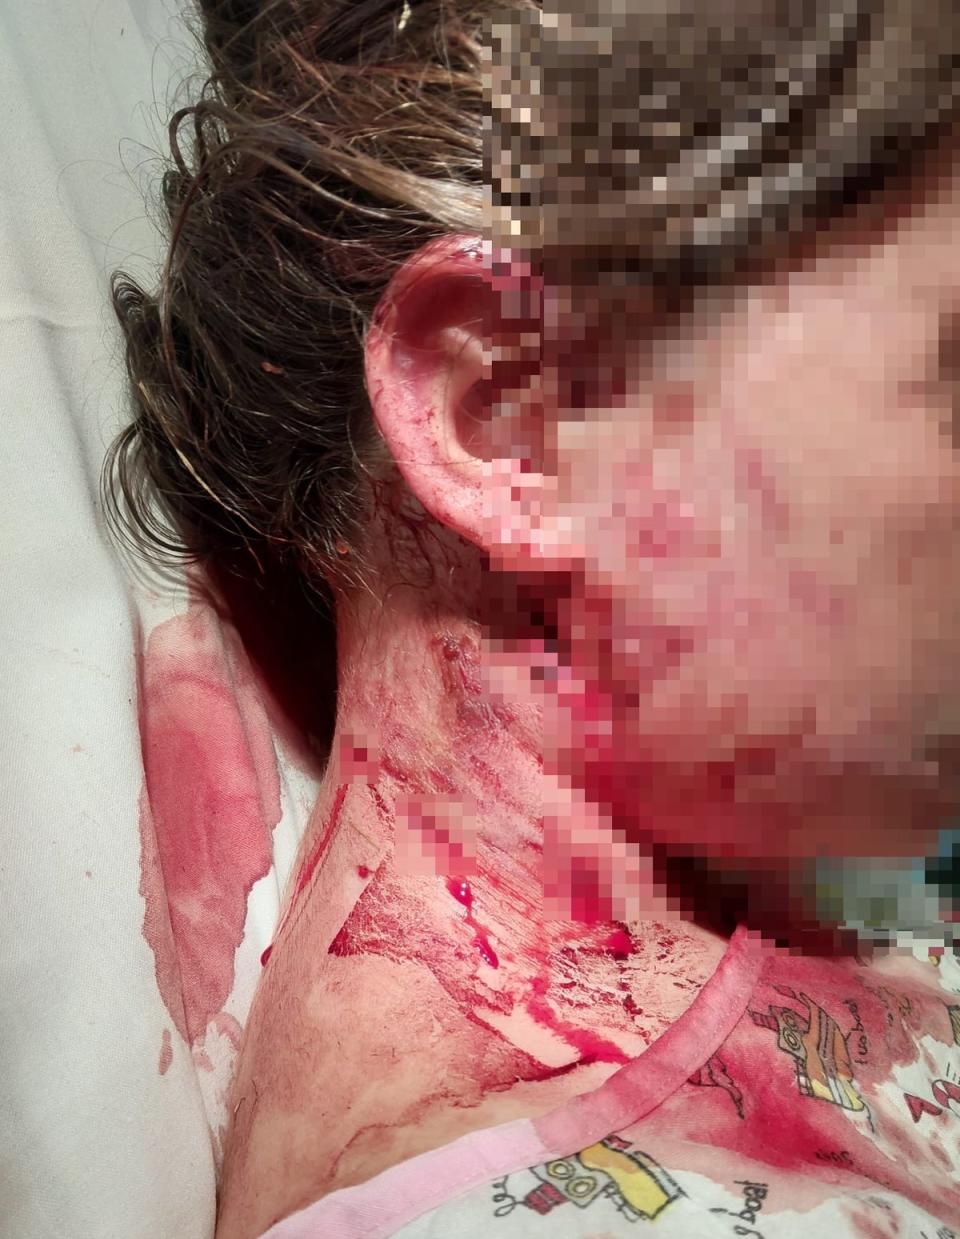 Ten-year-old girl was mauled by an XL bully in Doncaster on Monday (South Yorkshire Police)